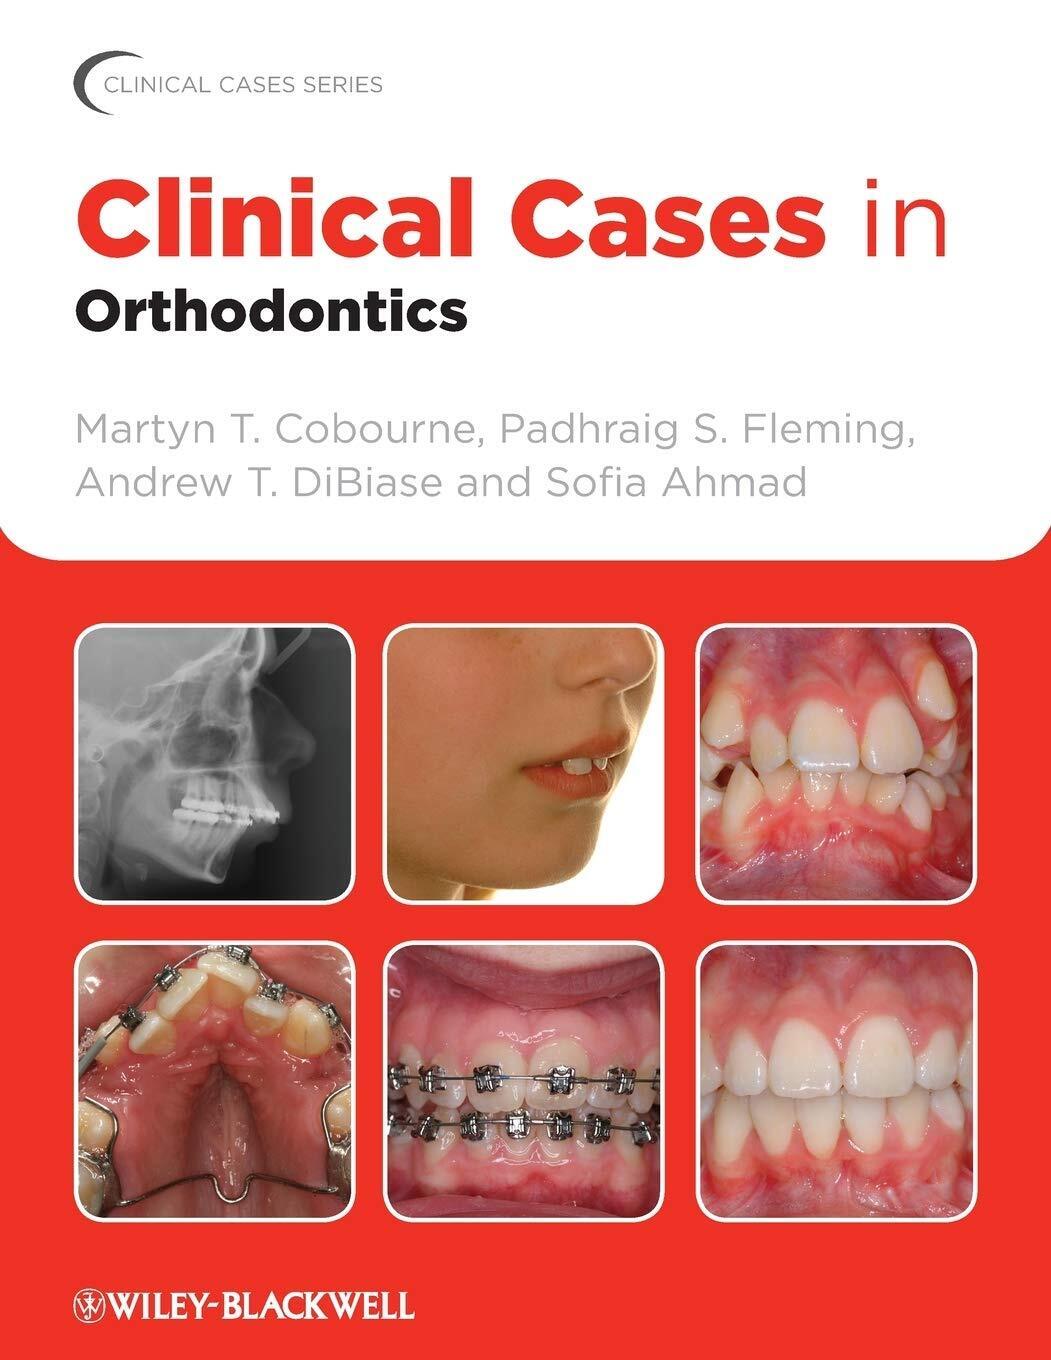 Clinical Cases in Orthodontics - Wiley John + Sons - 2012